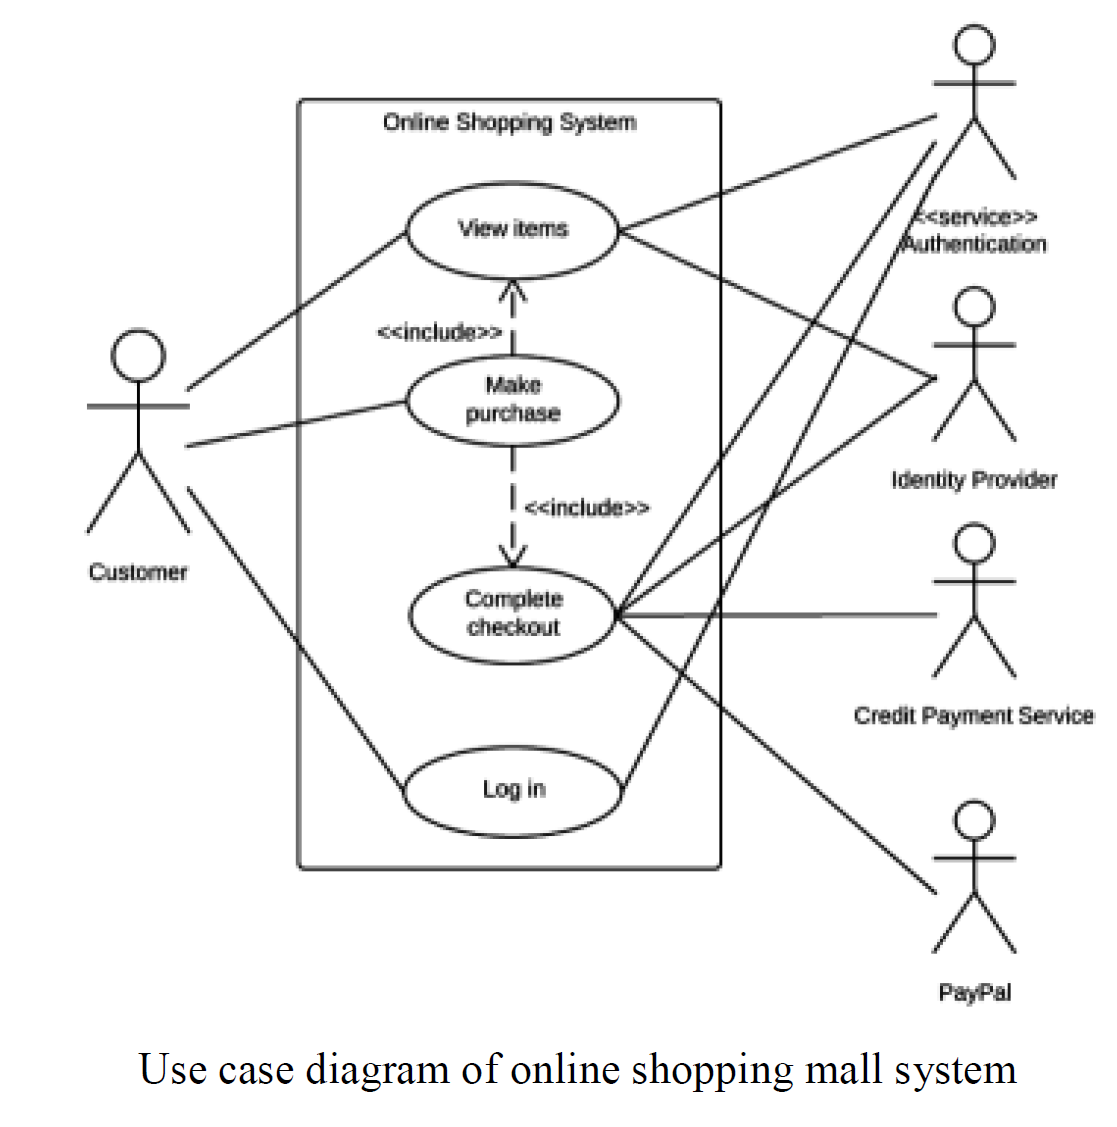 Online Shopping System
Aservice>>
Authentication
View items
<cinclude>
Make
purchase
Identity Provider
<cinclude>>
Customer
Complete
checkout
Credit Payment Service
Log in
PayPal
Use case diagram of online shopping mall system
아< 아<
